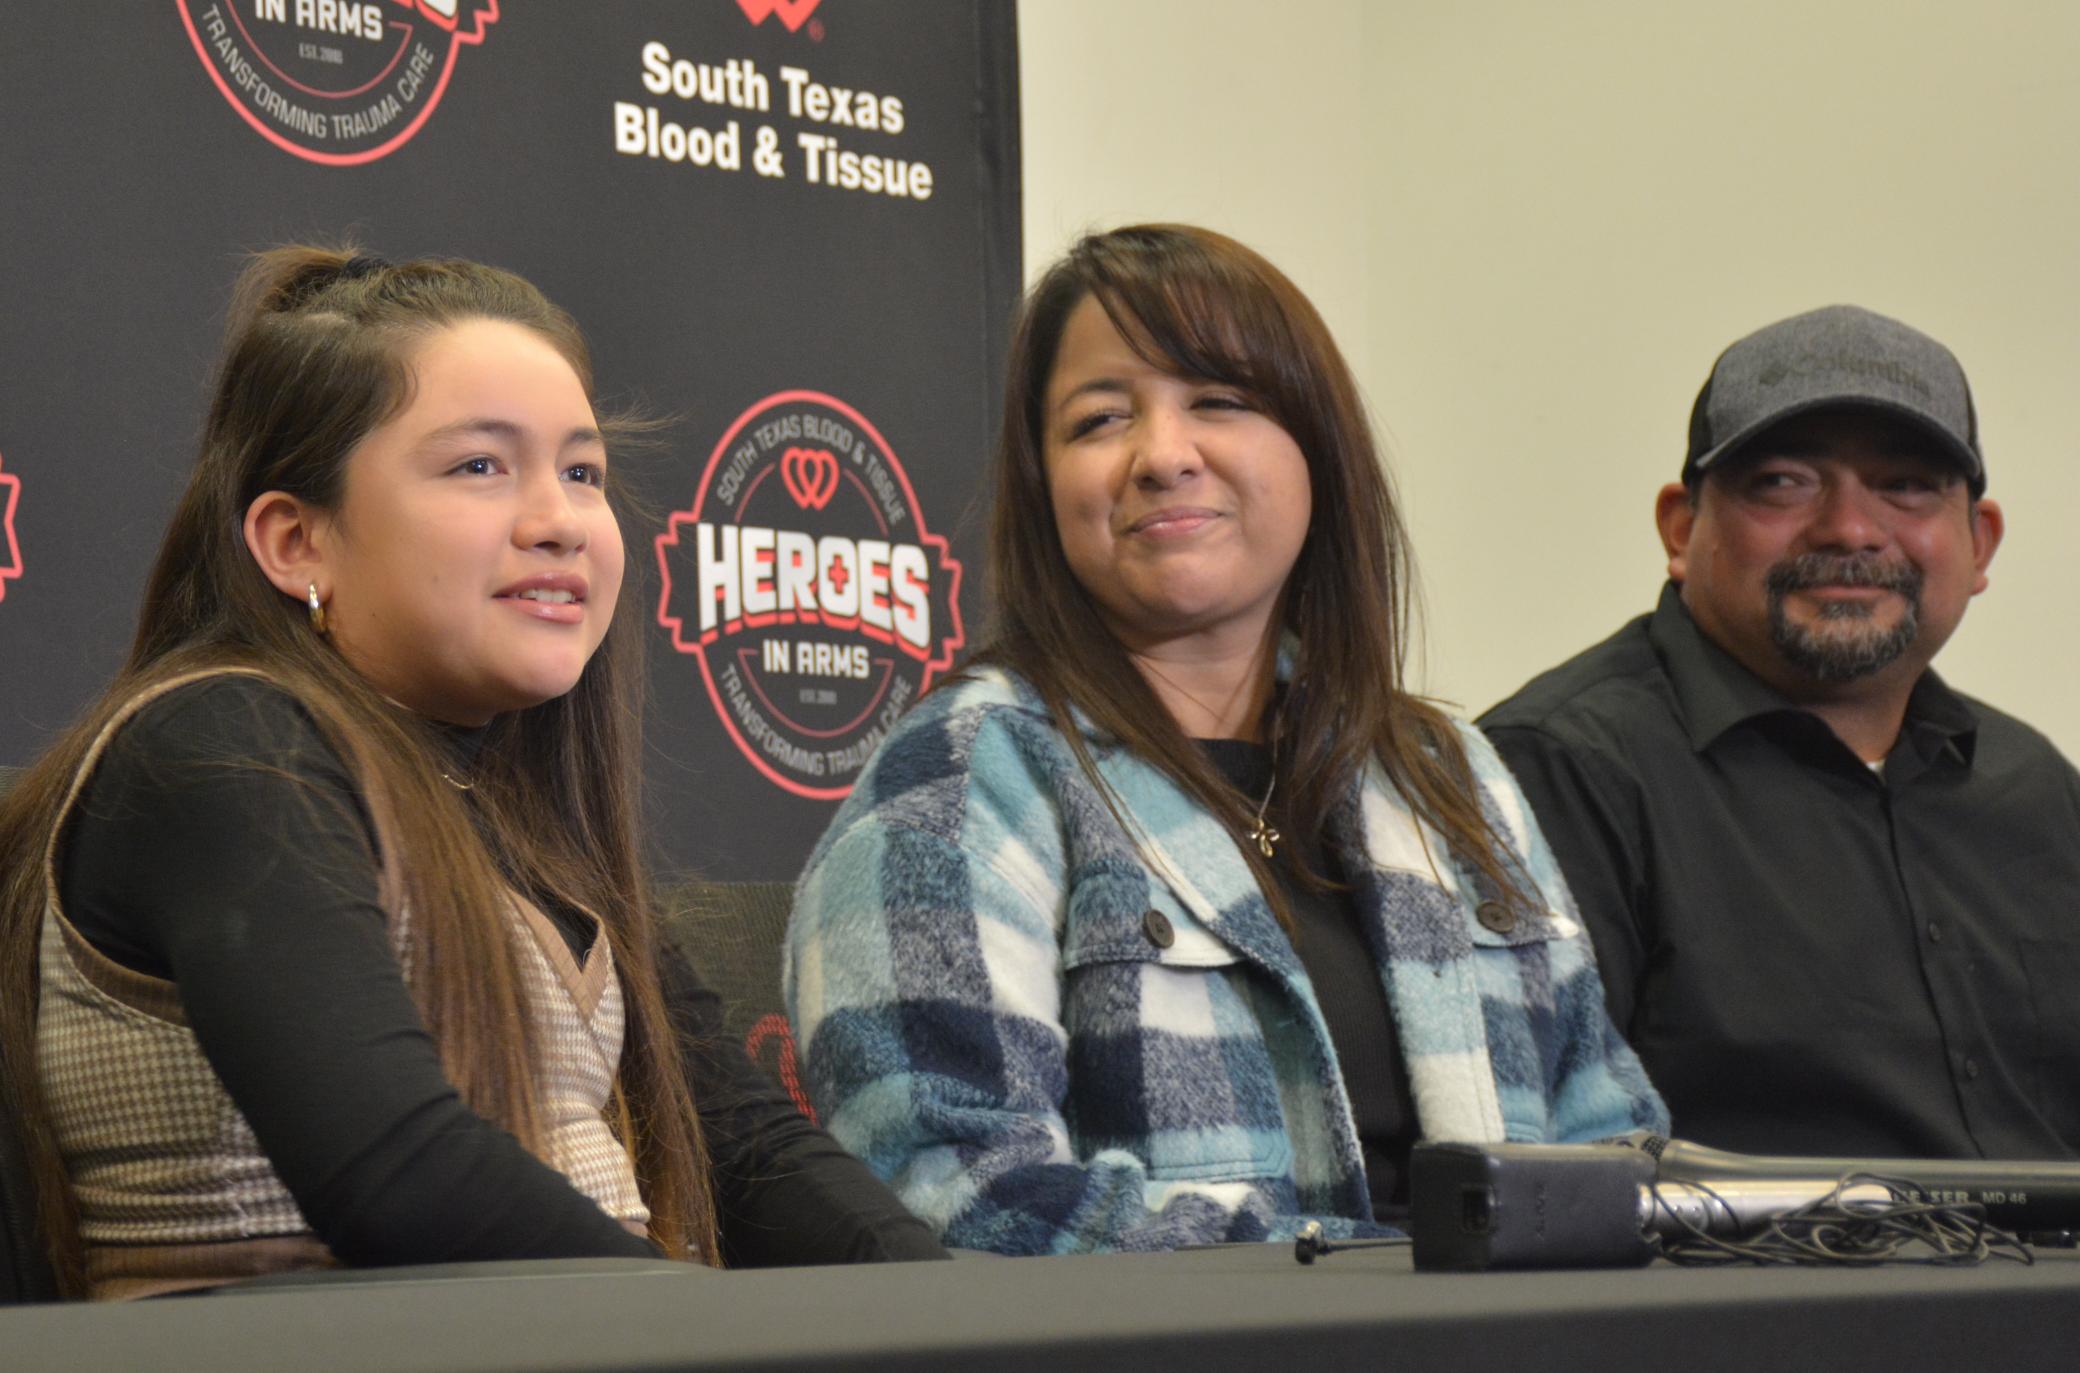 One year after the mass shooting in Uvalde, South Texas Blood & Tissue recognizes importance of blood before tragedies